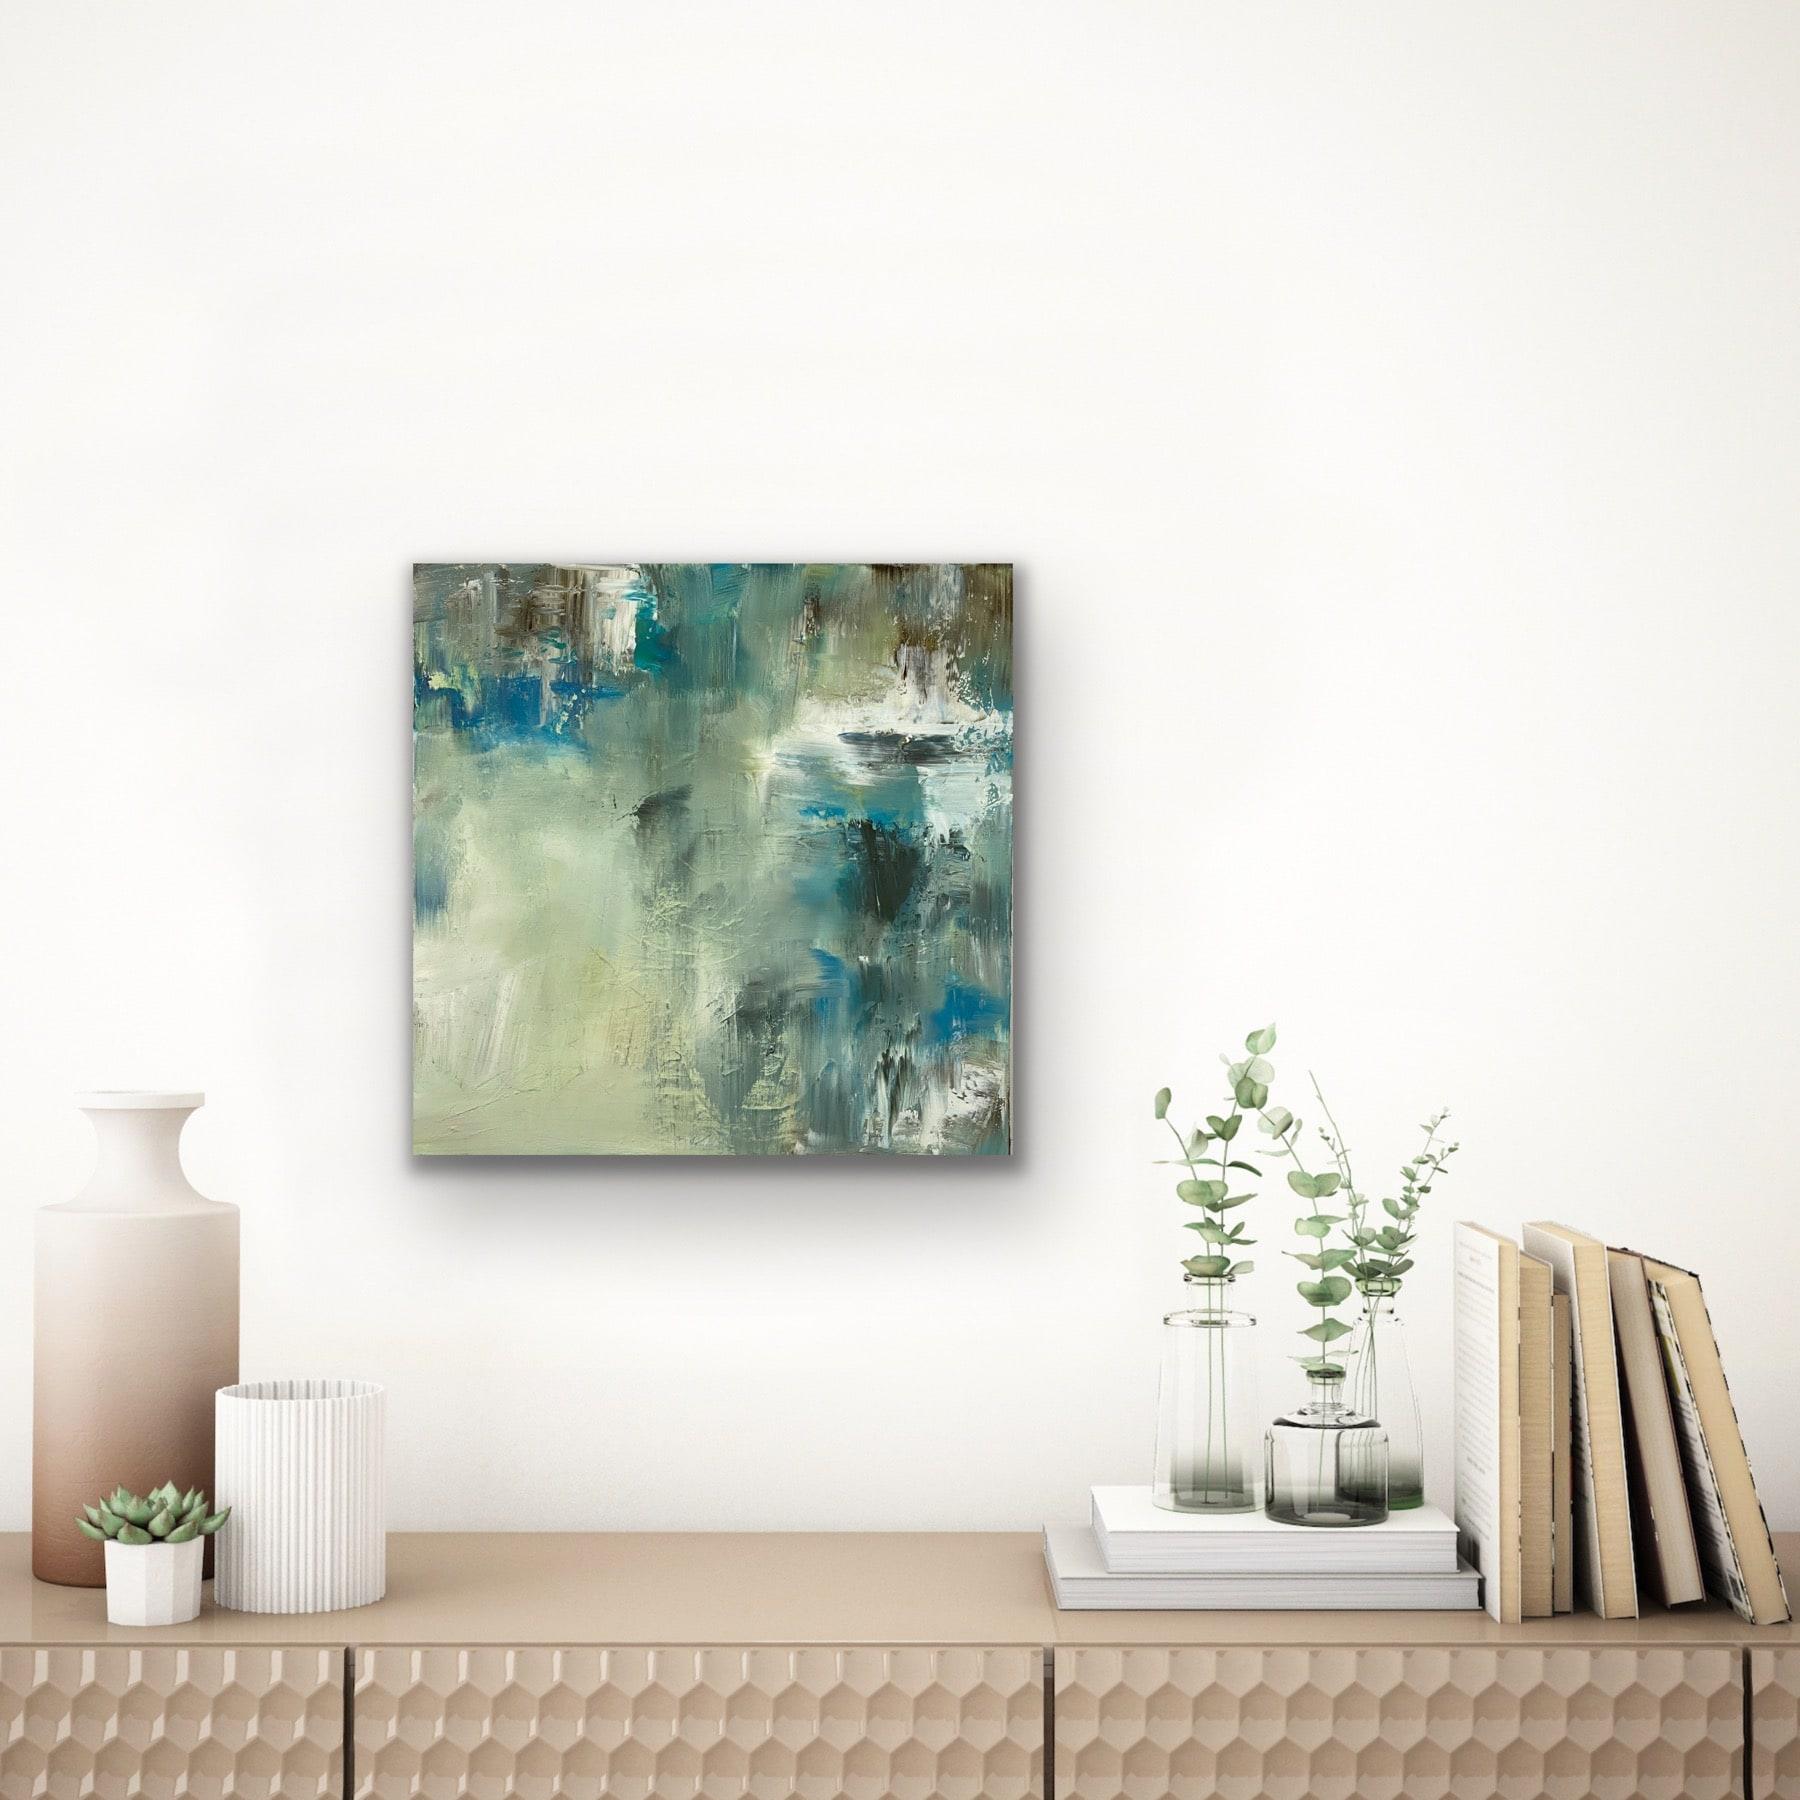 “Out of the Blue” 24 x 24 inches is a one-of-a-kind original, abstract expressionist painting by Juanita Bellavance. painting blue, yellow, gray, brown and white create an aura of space and shape.

Statement:

I begin my paintings with a certain